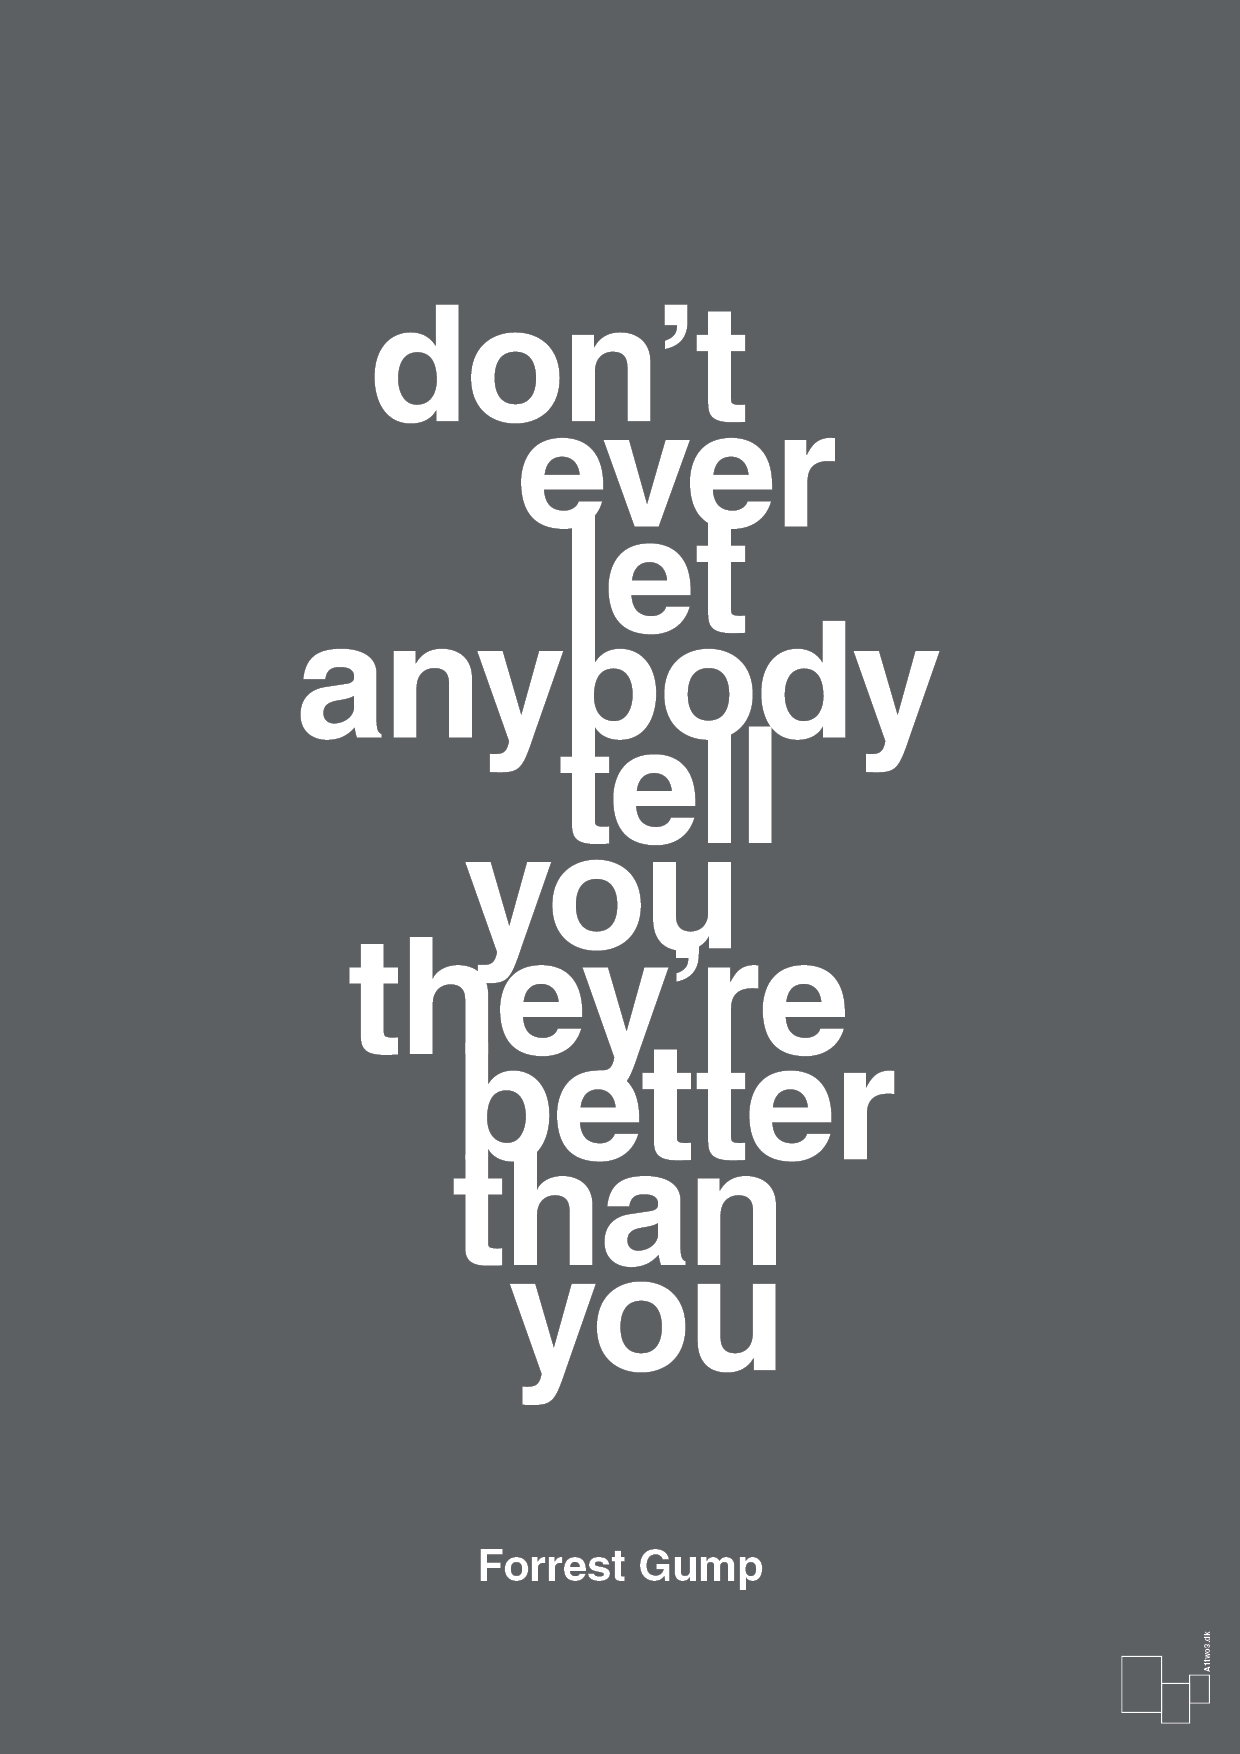 don’t ever let anybody tell you they’re better than you - Plakat med Citater i Graphic Charcoal